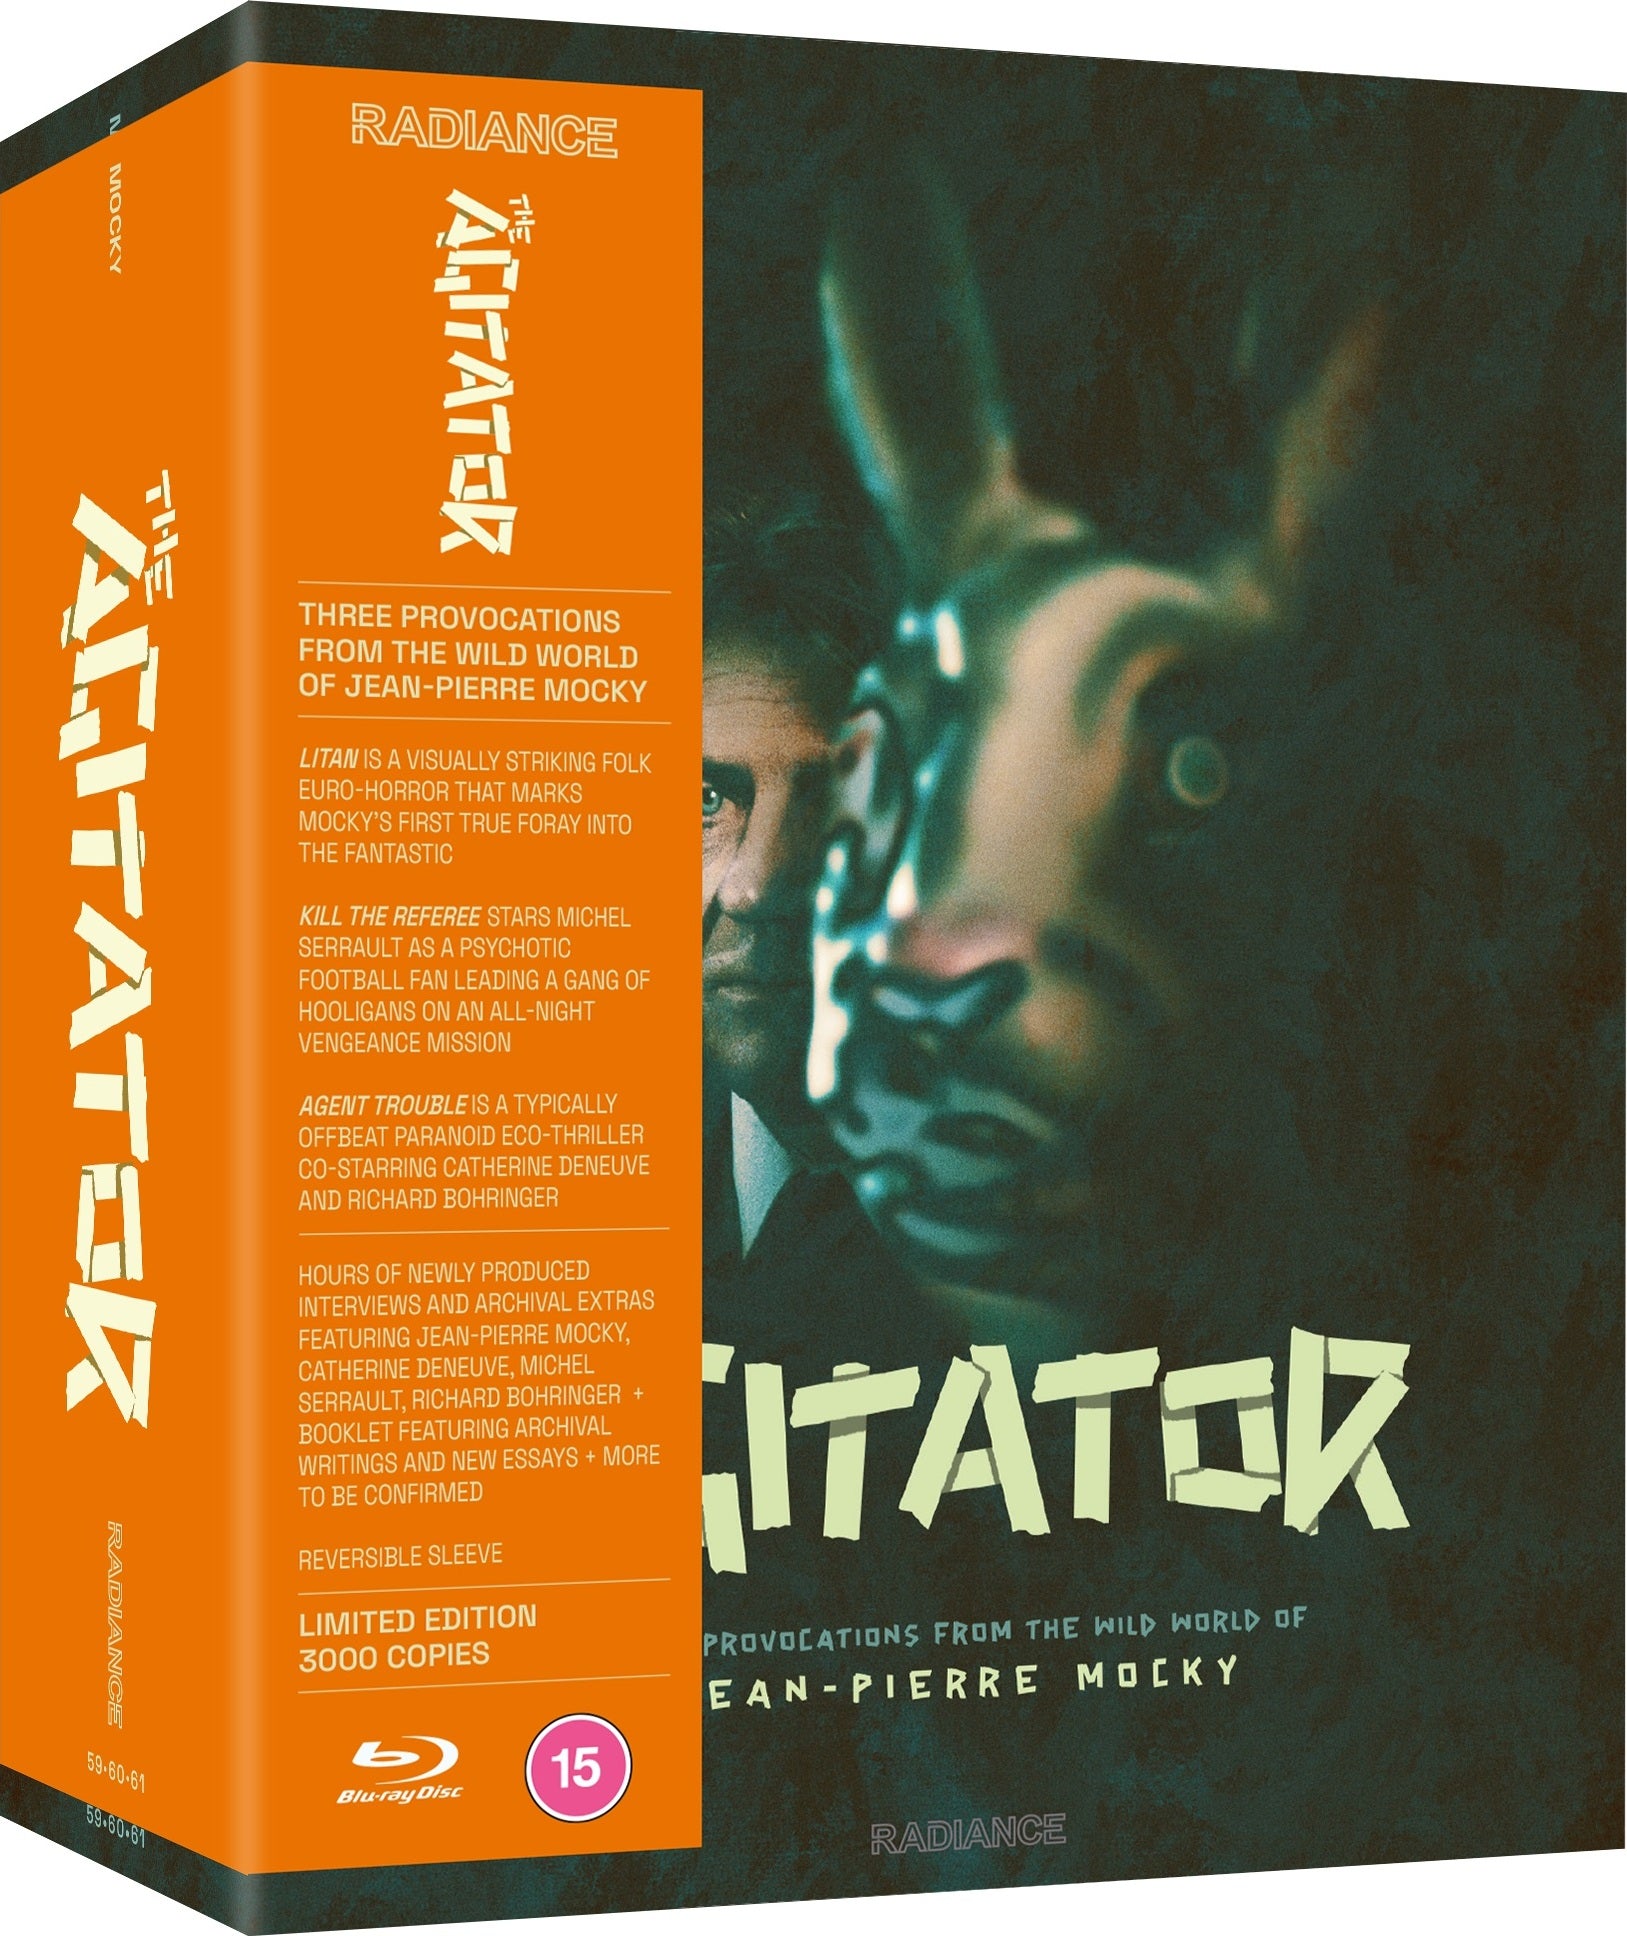 THE AGITATOR: THREE PROVOCATIONS FROM THE WILD WORLD OF JEAN-PIERRE MOCKY (REGION B IMPORT - LIMITED EDITION) BLU-RAY [PRE-ORDER]